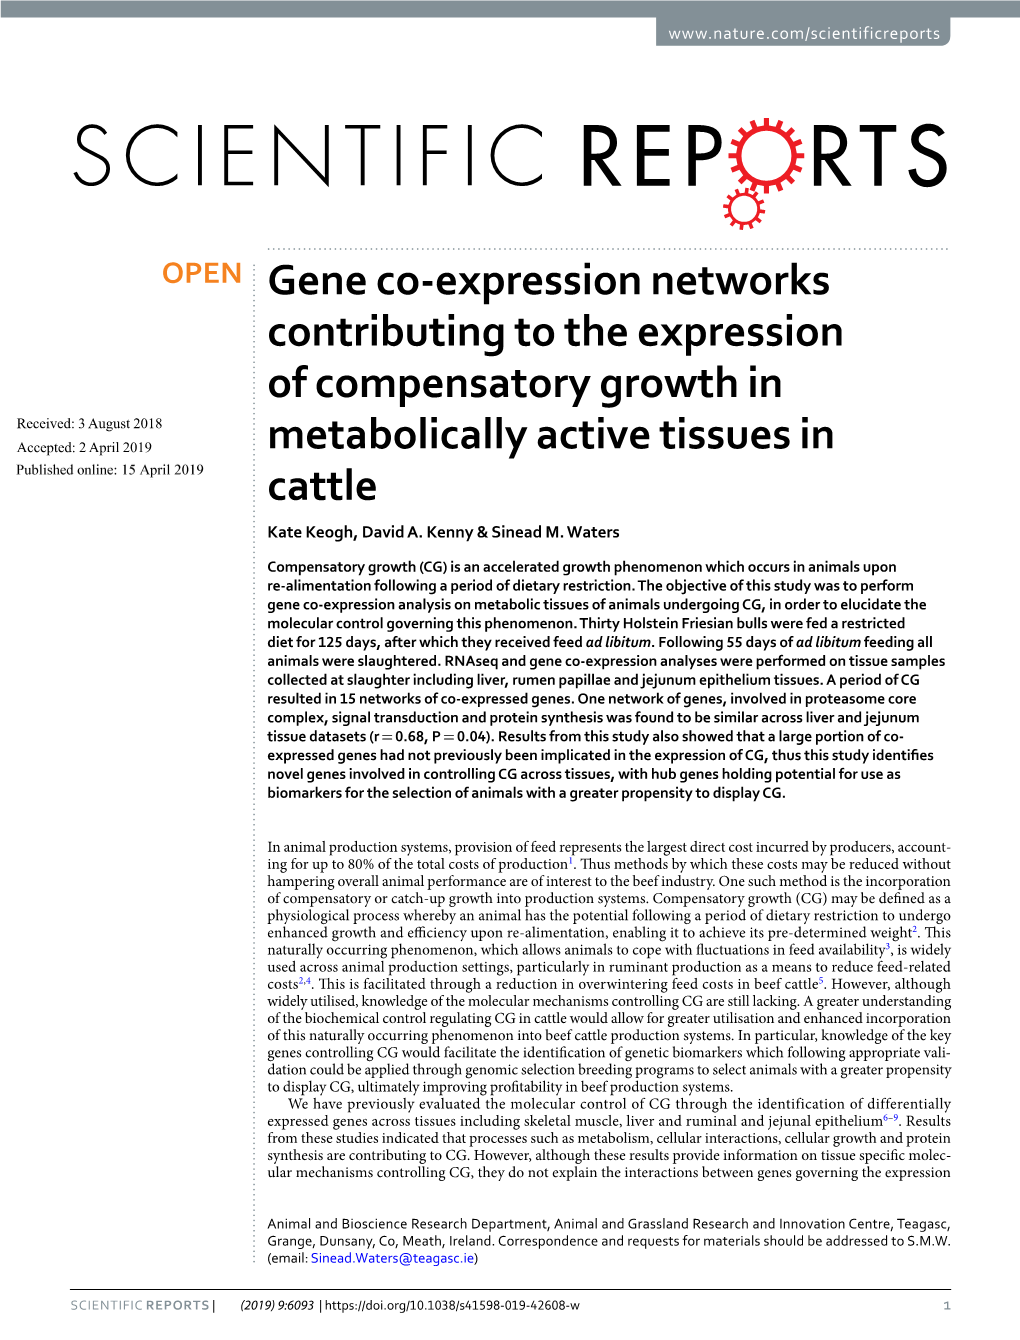 Gene Co-Expression Networks Contributing to the Expression Of